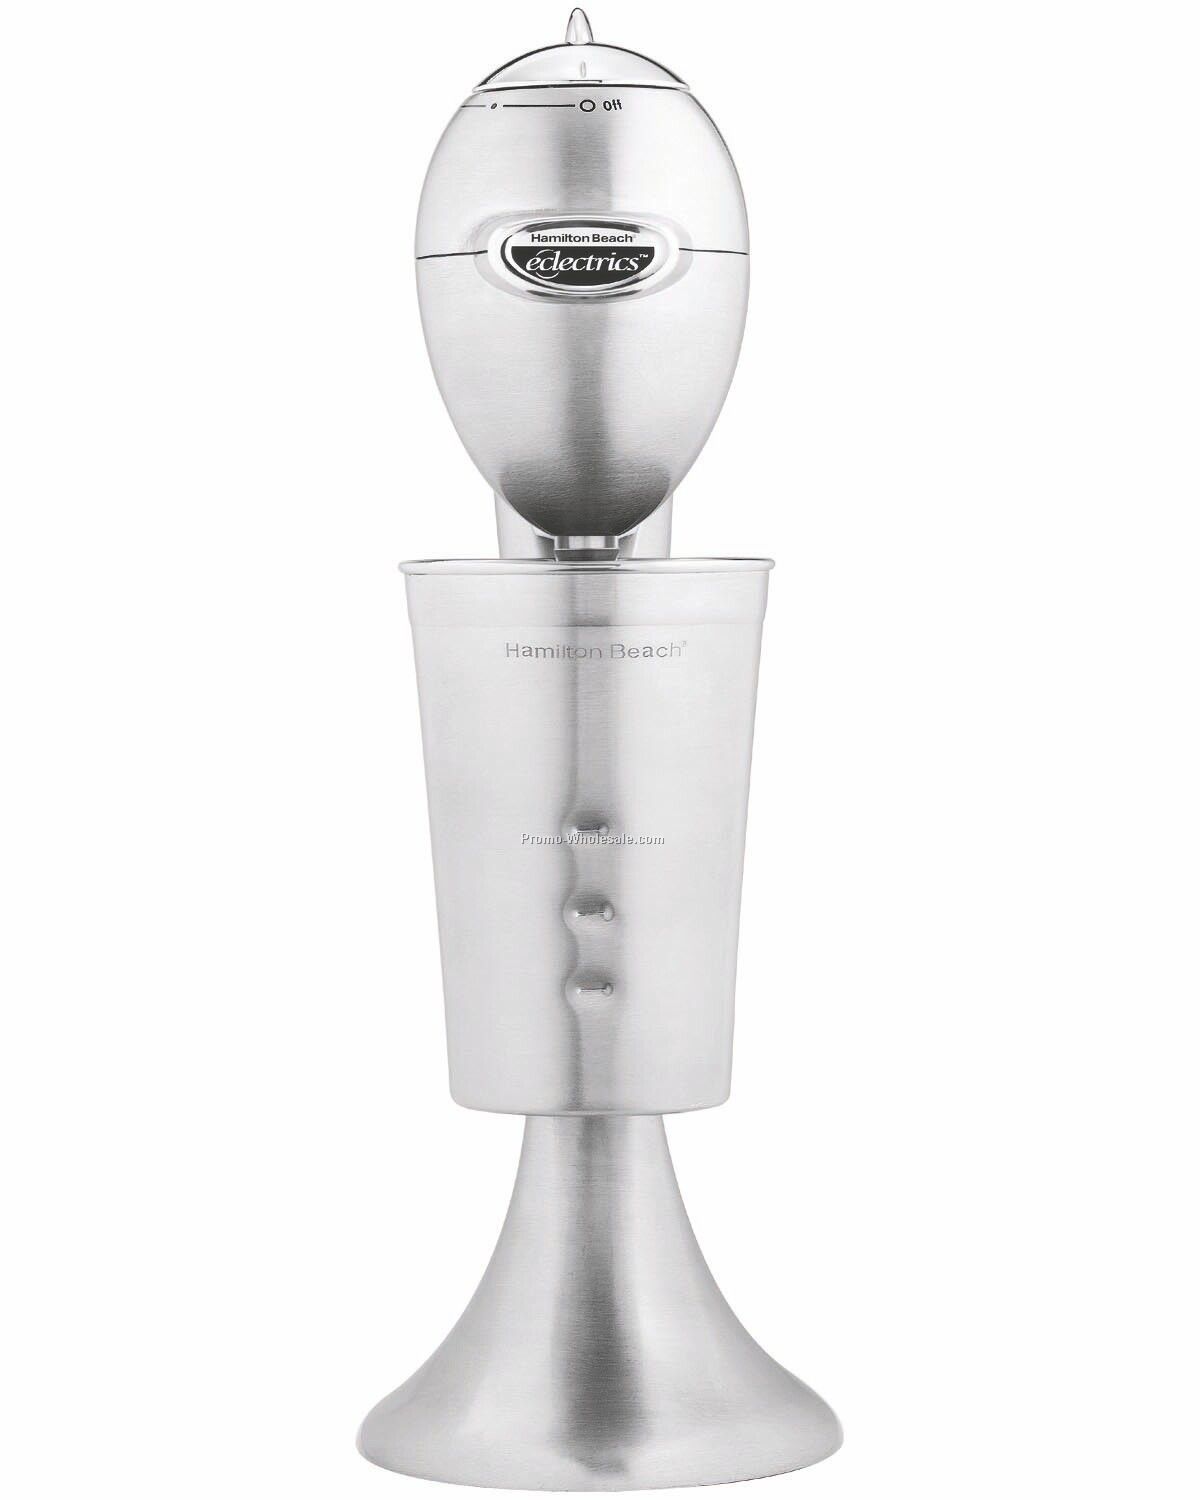 Hamilton Beach Eclectrics Sterling All-metal Drink Mixer